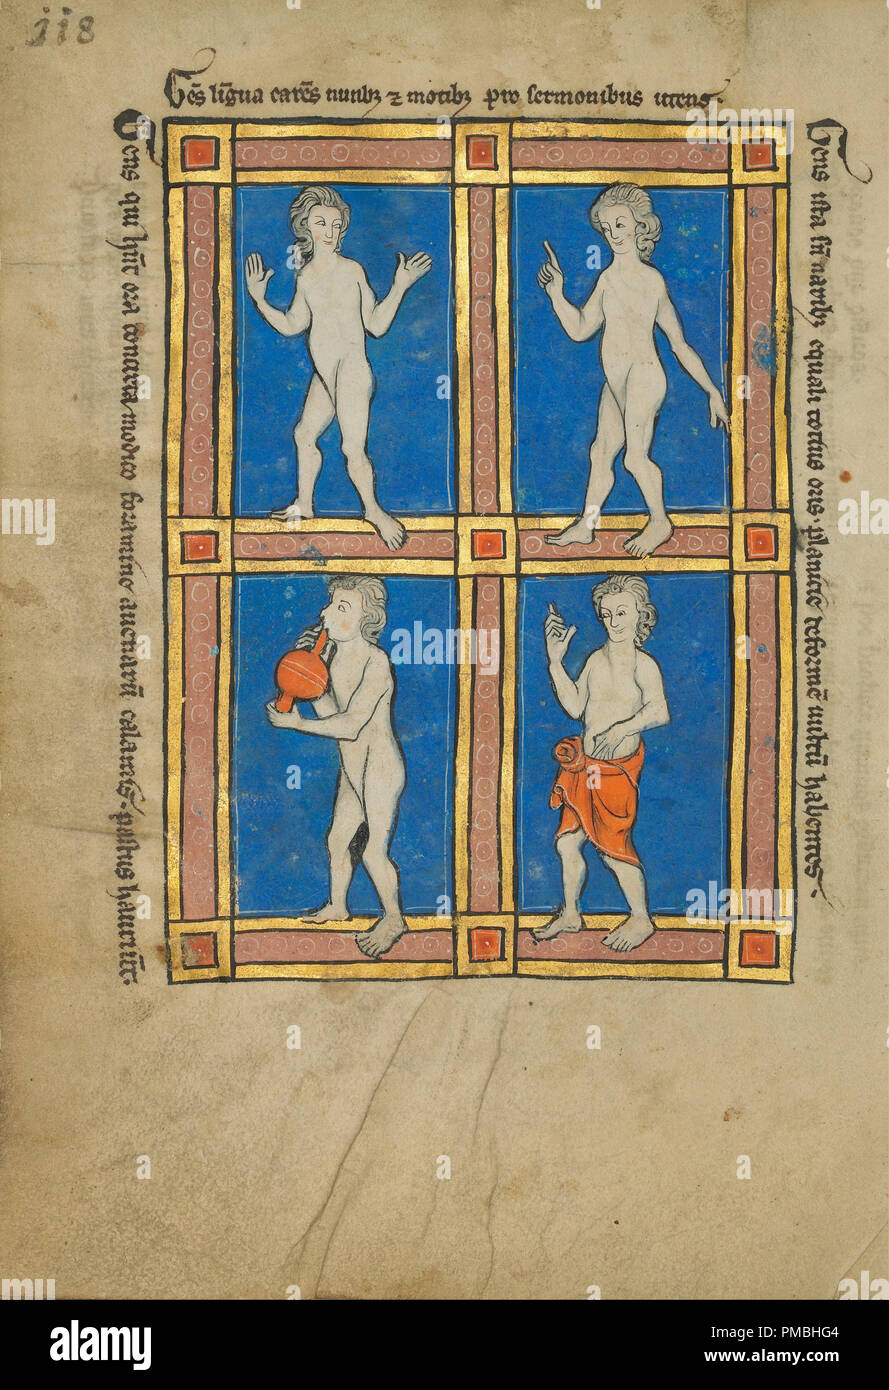 Men Who Speak Through Gestures; A Man Who Drinks From a Straw; A Man Without a Nose. Date/Period: Fourth quarter of 13th century (after 1277). Folio. Tempera colors, pen and ink, gold leaf, and gold paint on parchment. Height: 233 mm (9.17 in); Width: 164 mm (6.45 in). Author: UNKNOWN. Stock Photo